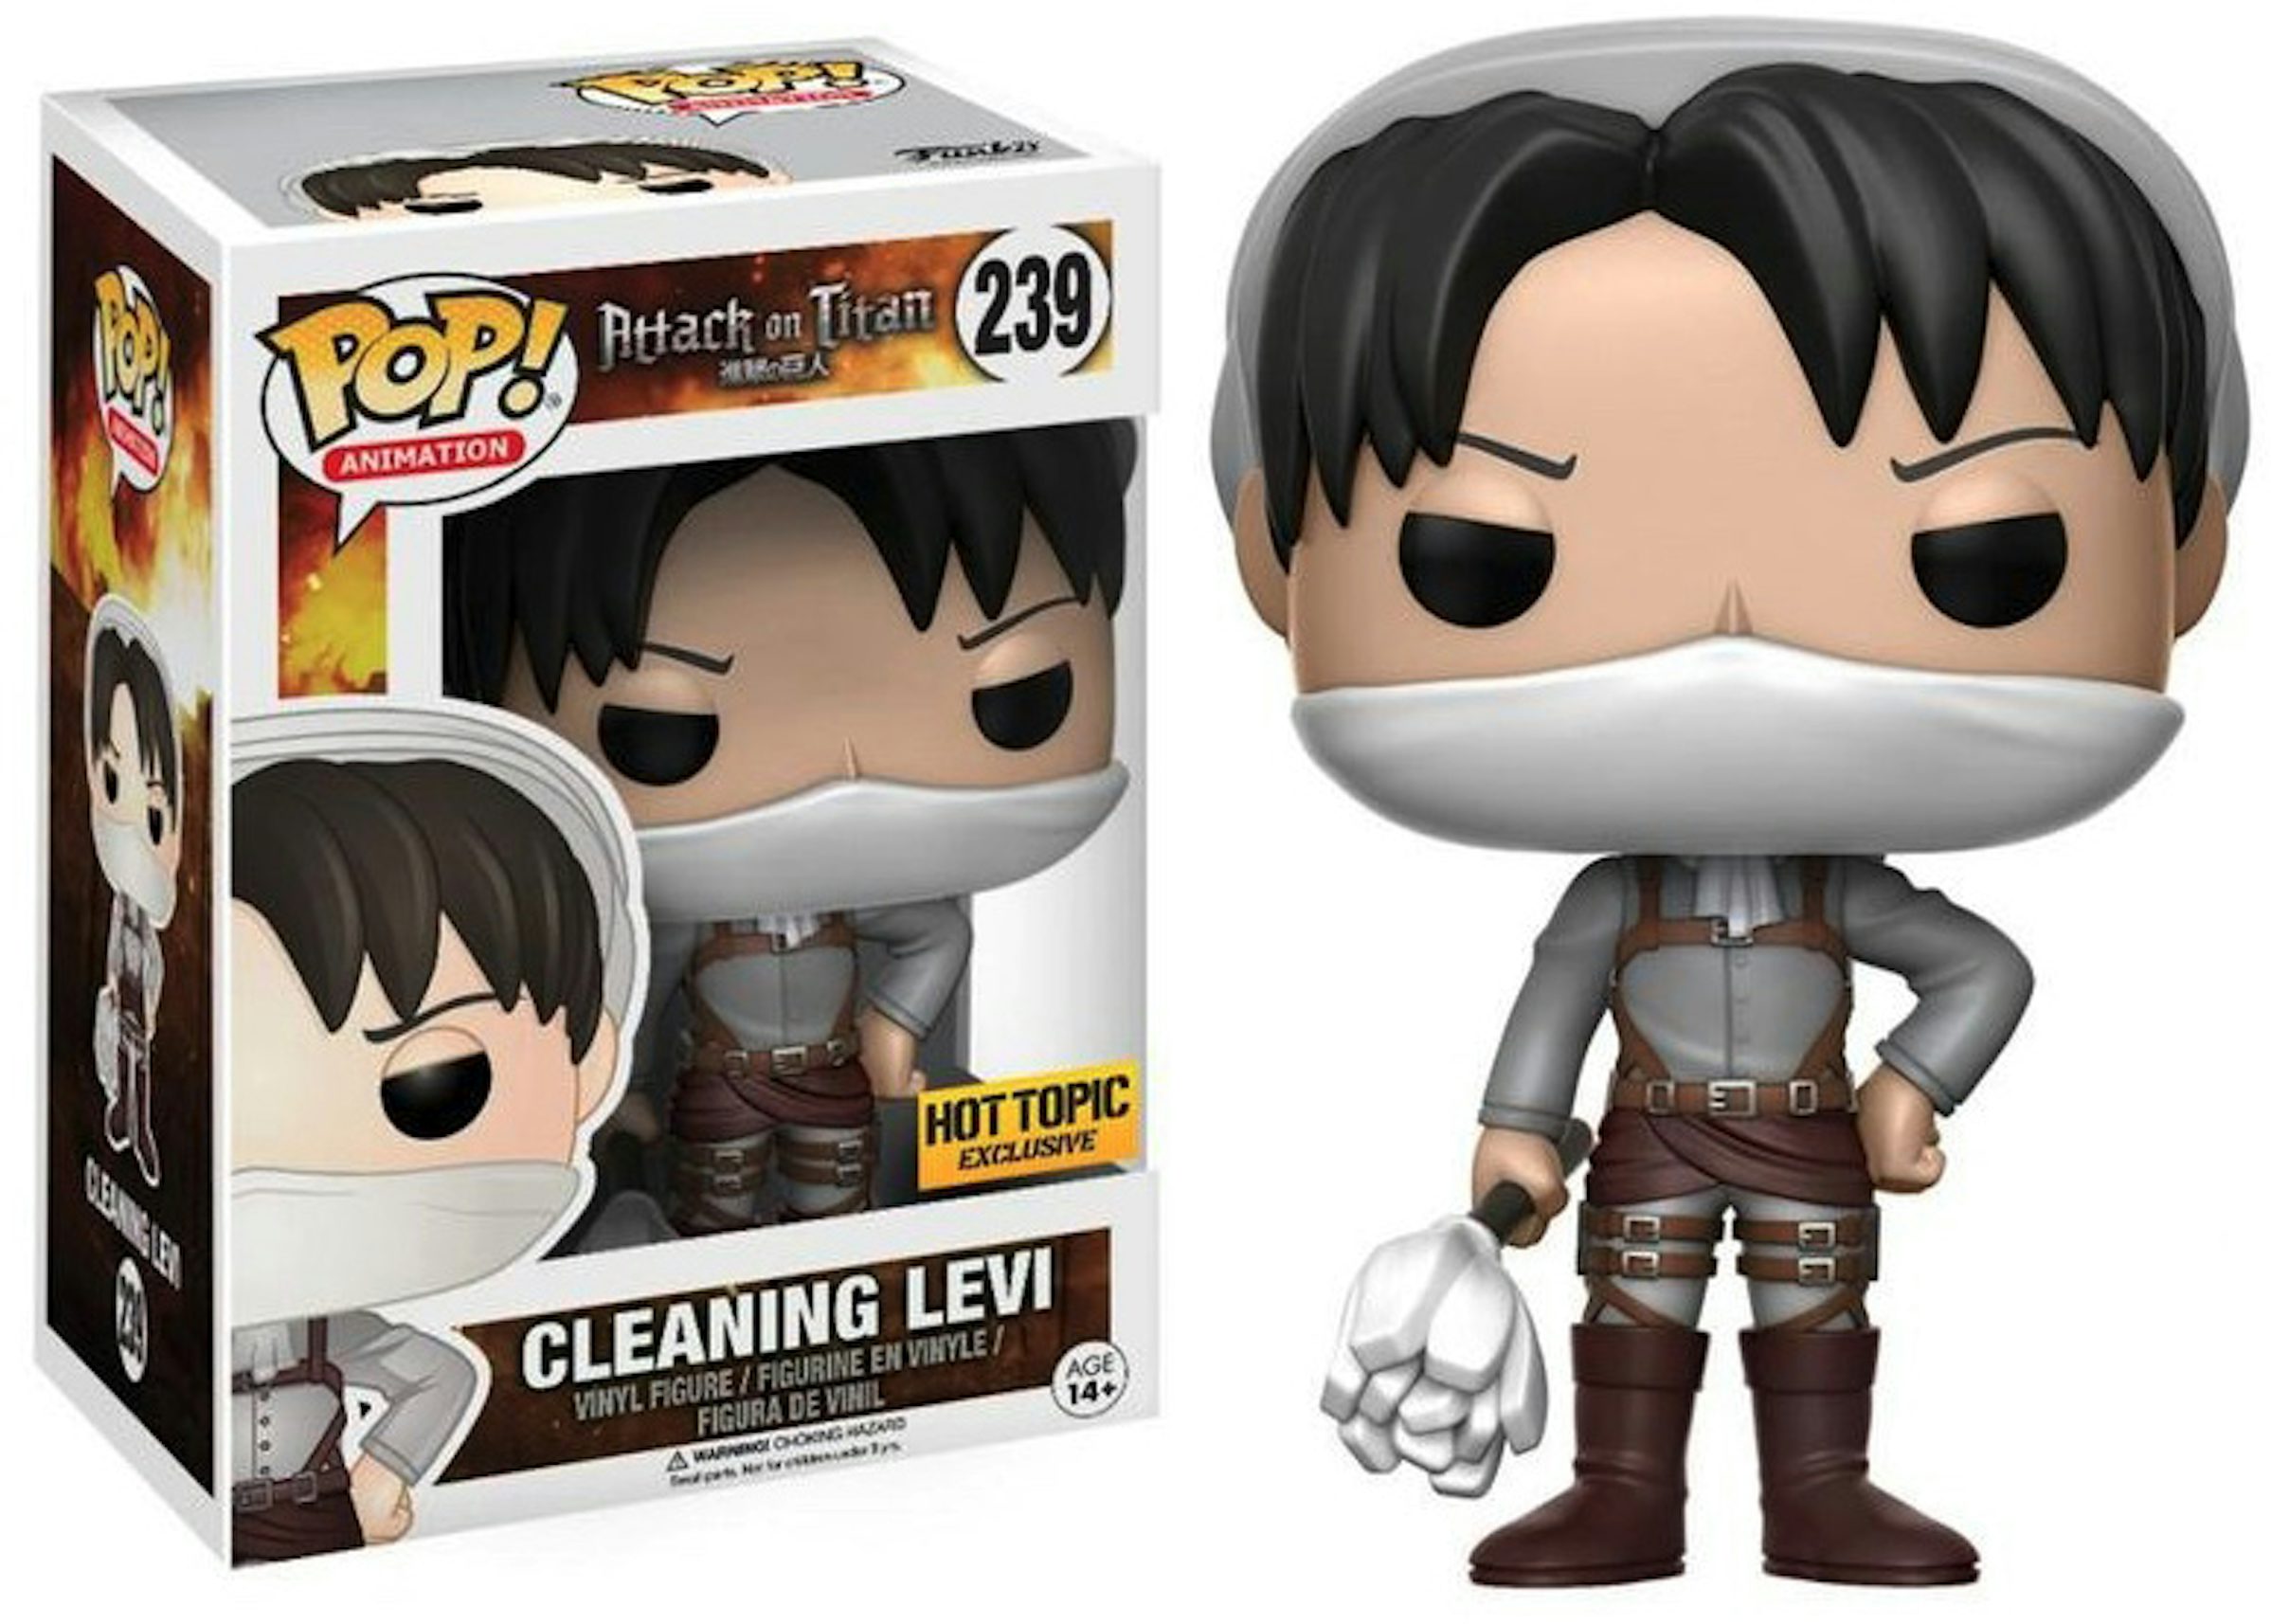 Funko Pop! Animation Attack on Titan Cleaning Levi Hot Topic Exclusive  Figure #239 - US